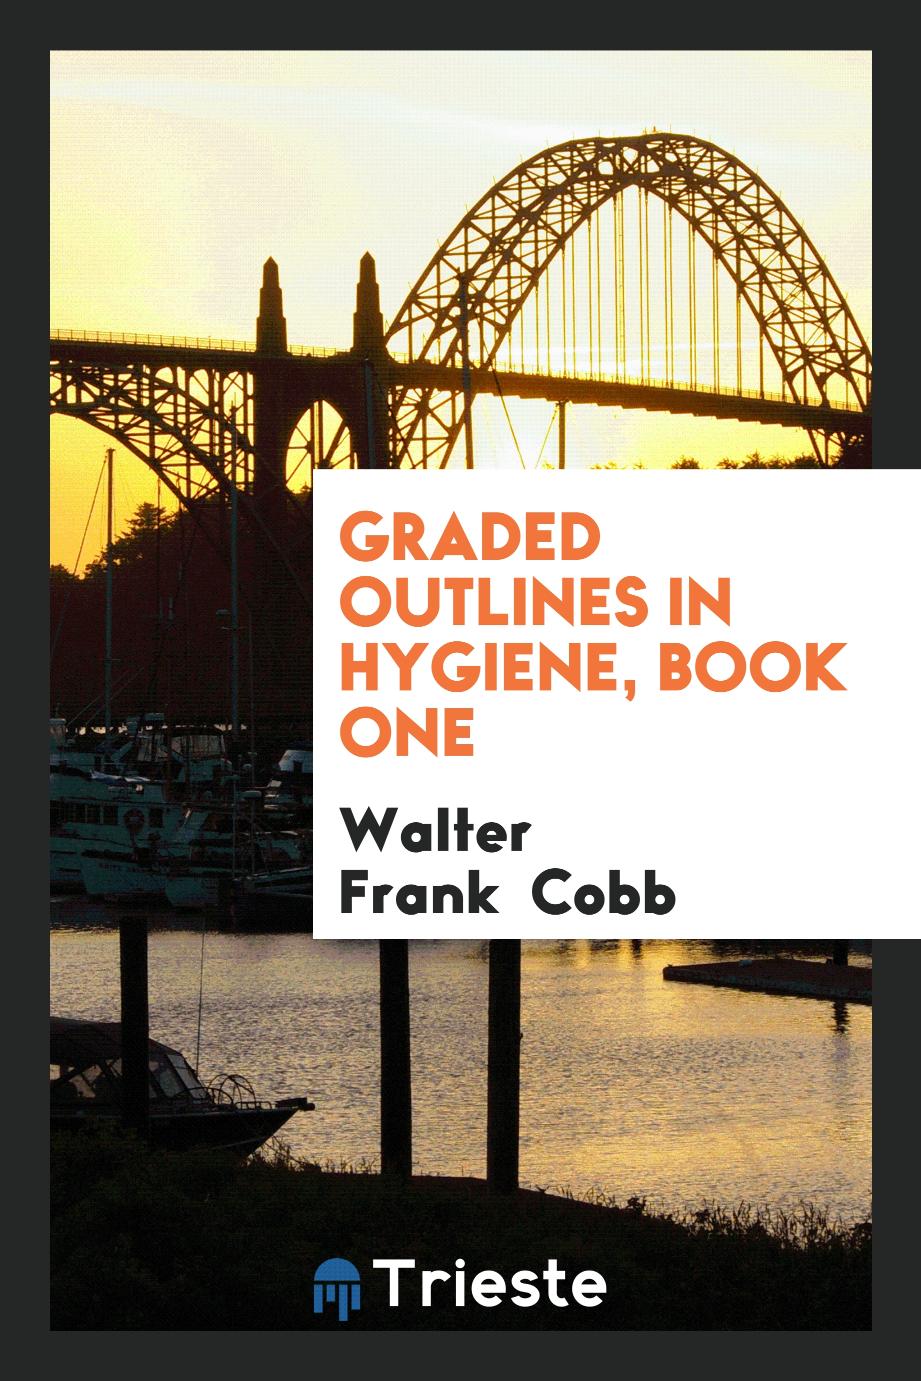 Graded Outlines in Hygiene, Book One